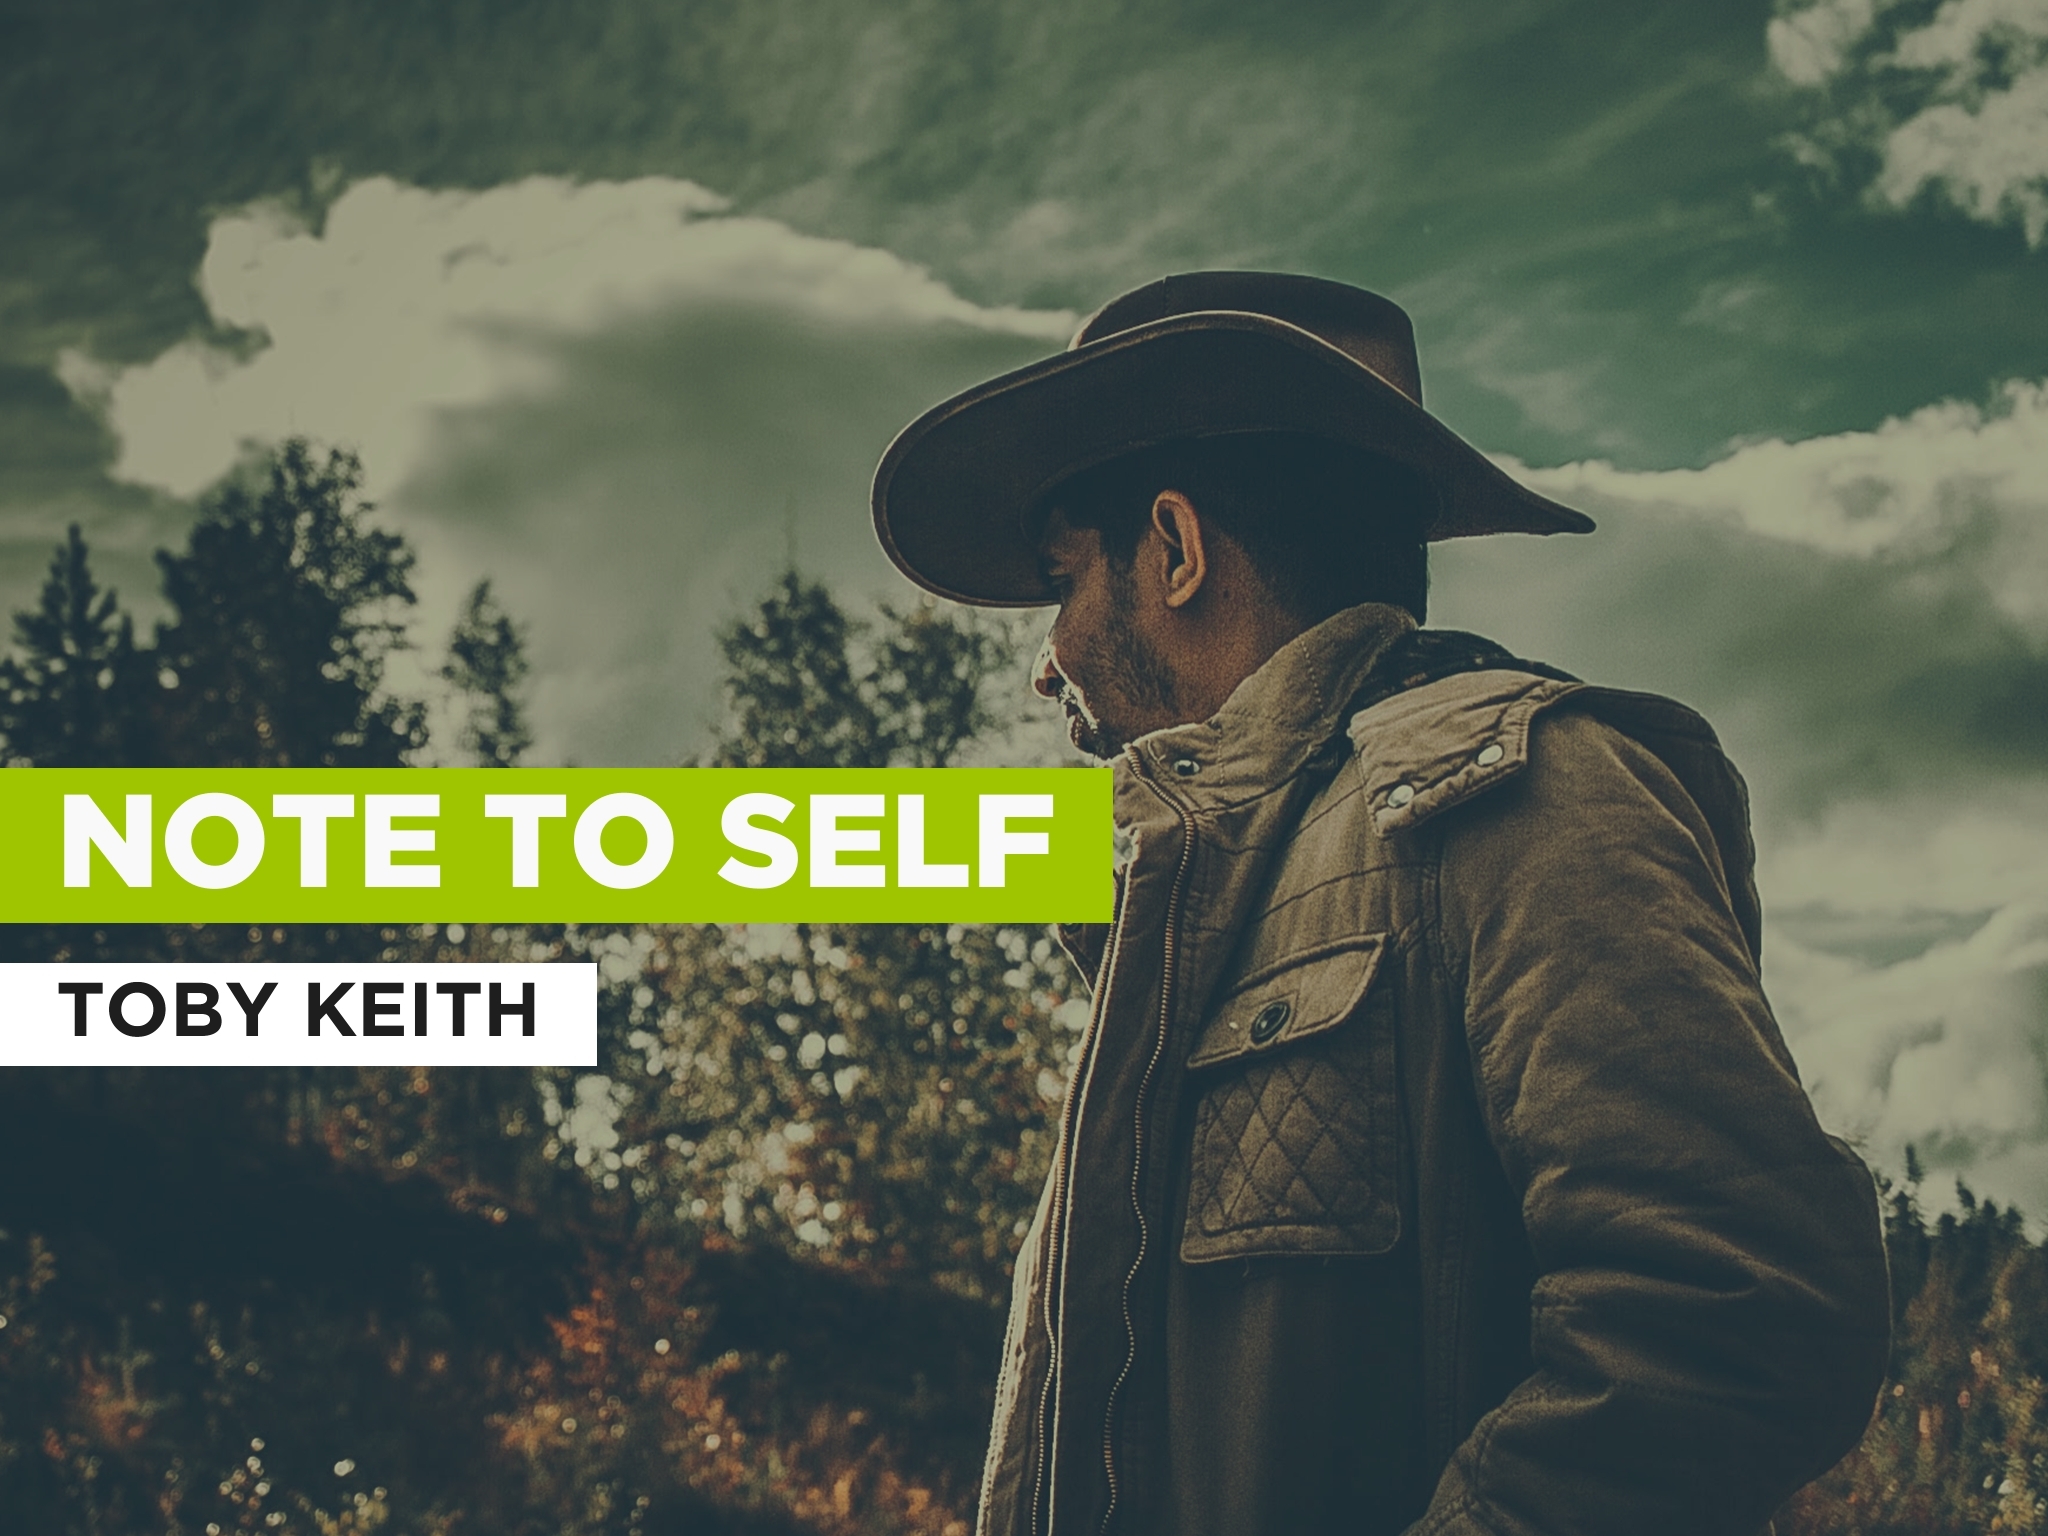 Prime Video: Note To Self in the Style of Toby Keith